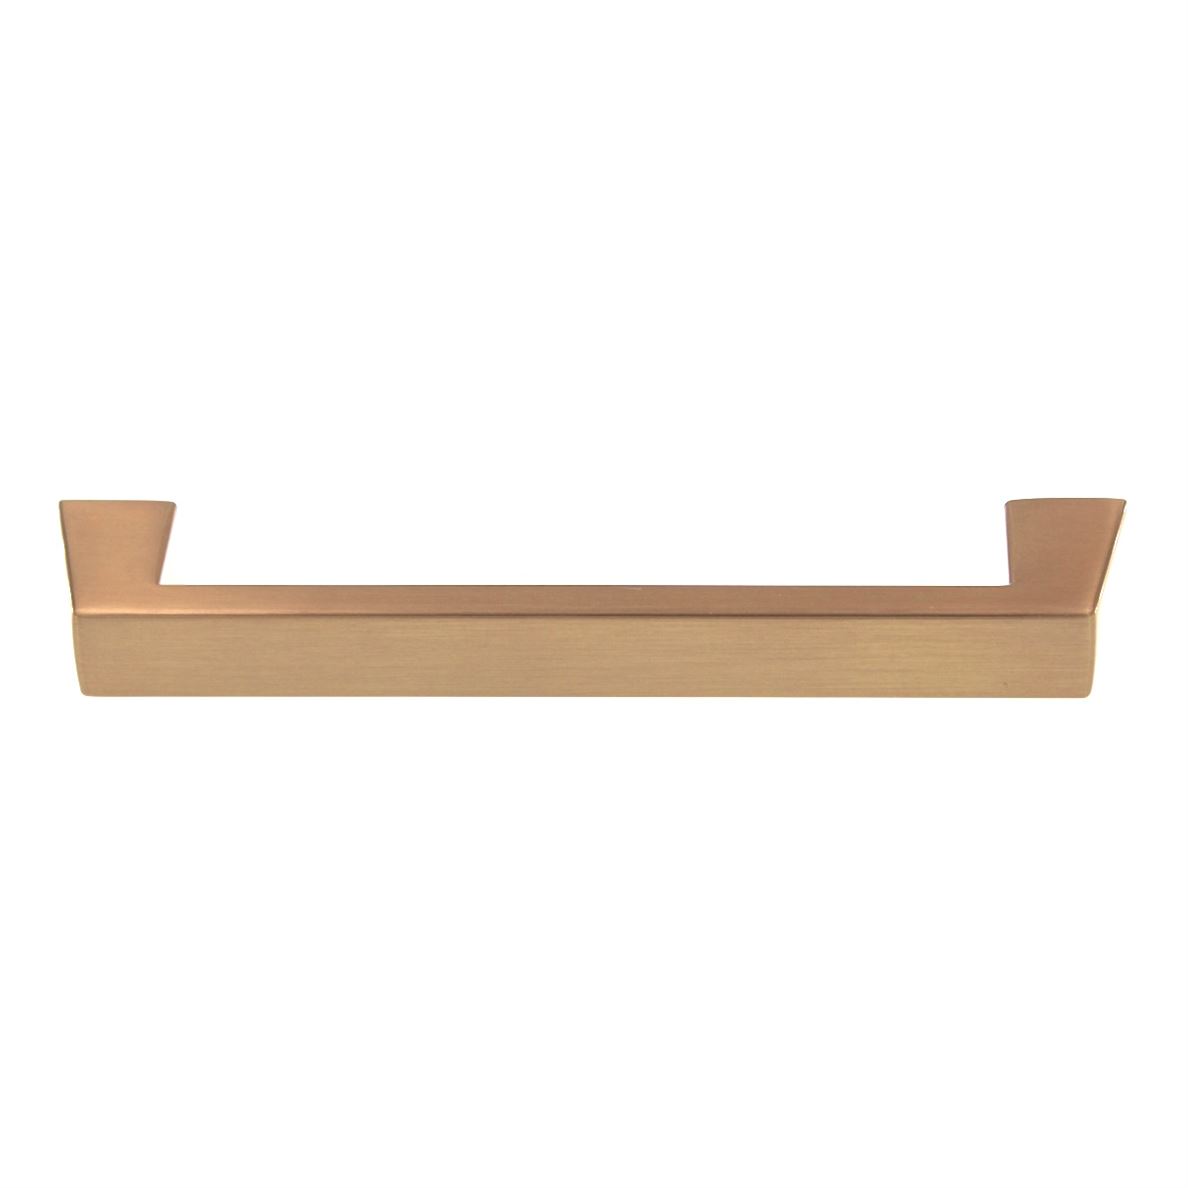 Pride Colorado Cabinet Arch Pull 5" (128mm) Ctr Rose Gold P92837-RG